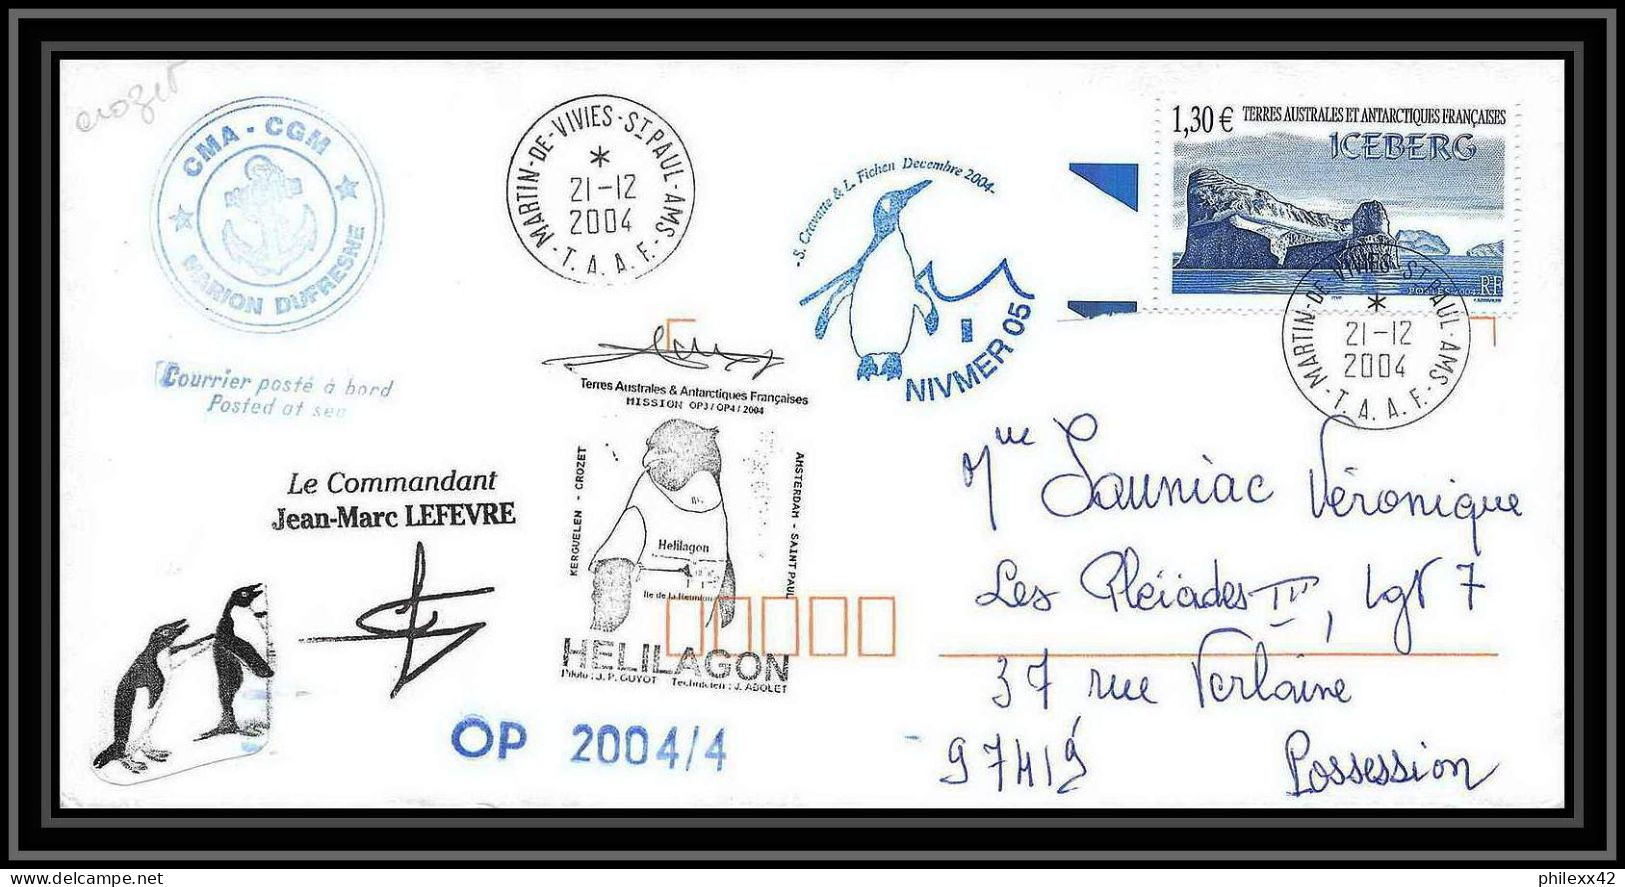 2485 ANTARCTIC Terres Australes TAAF Lettre Cover Dufresne 2 Signé Signed OP 2004/4 N°387 21/12/2004 Helilagon - Helicopters